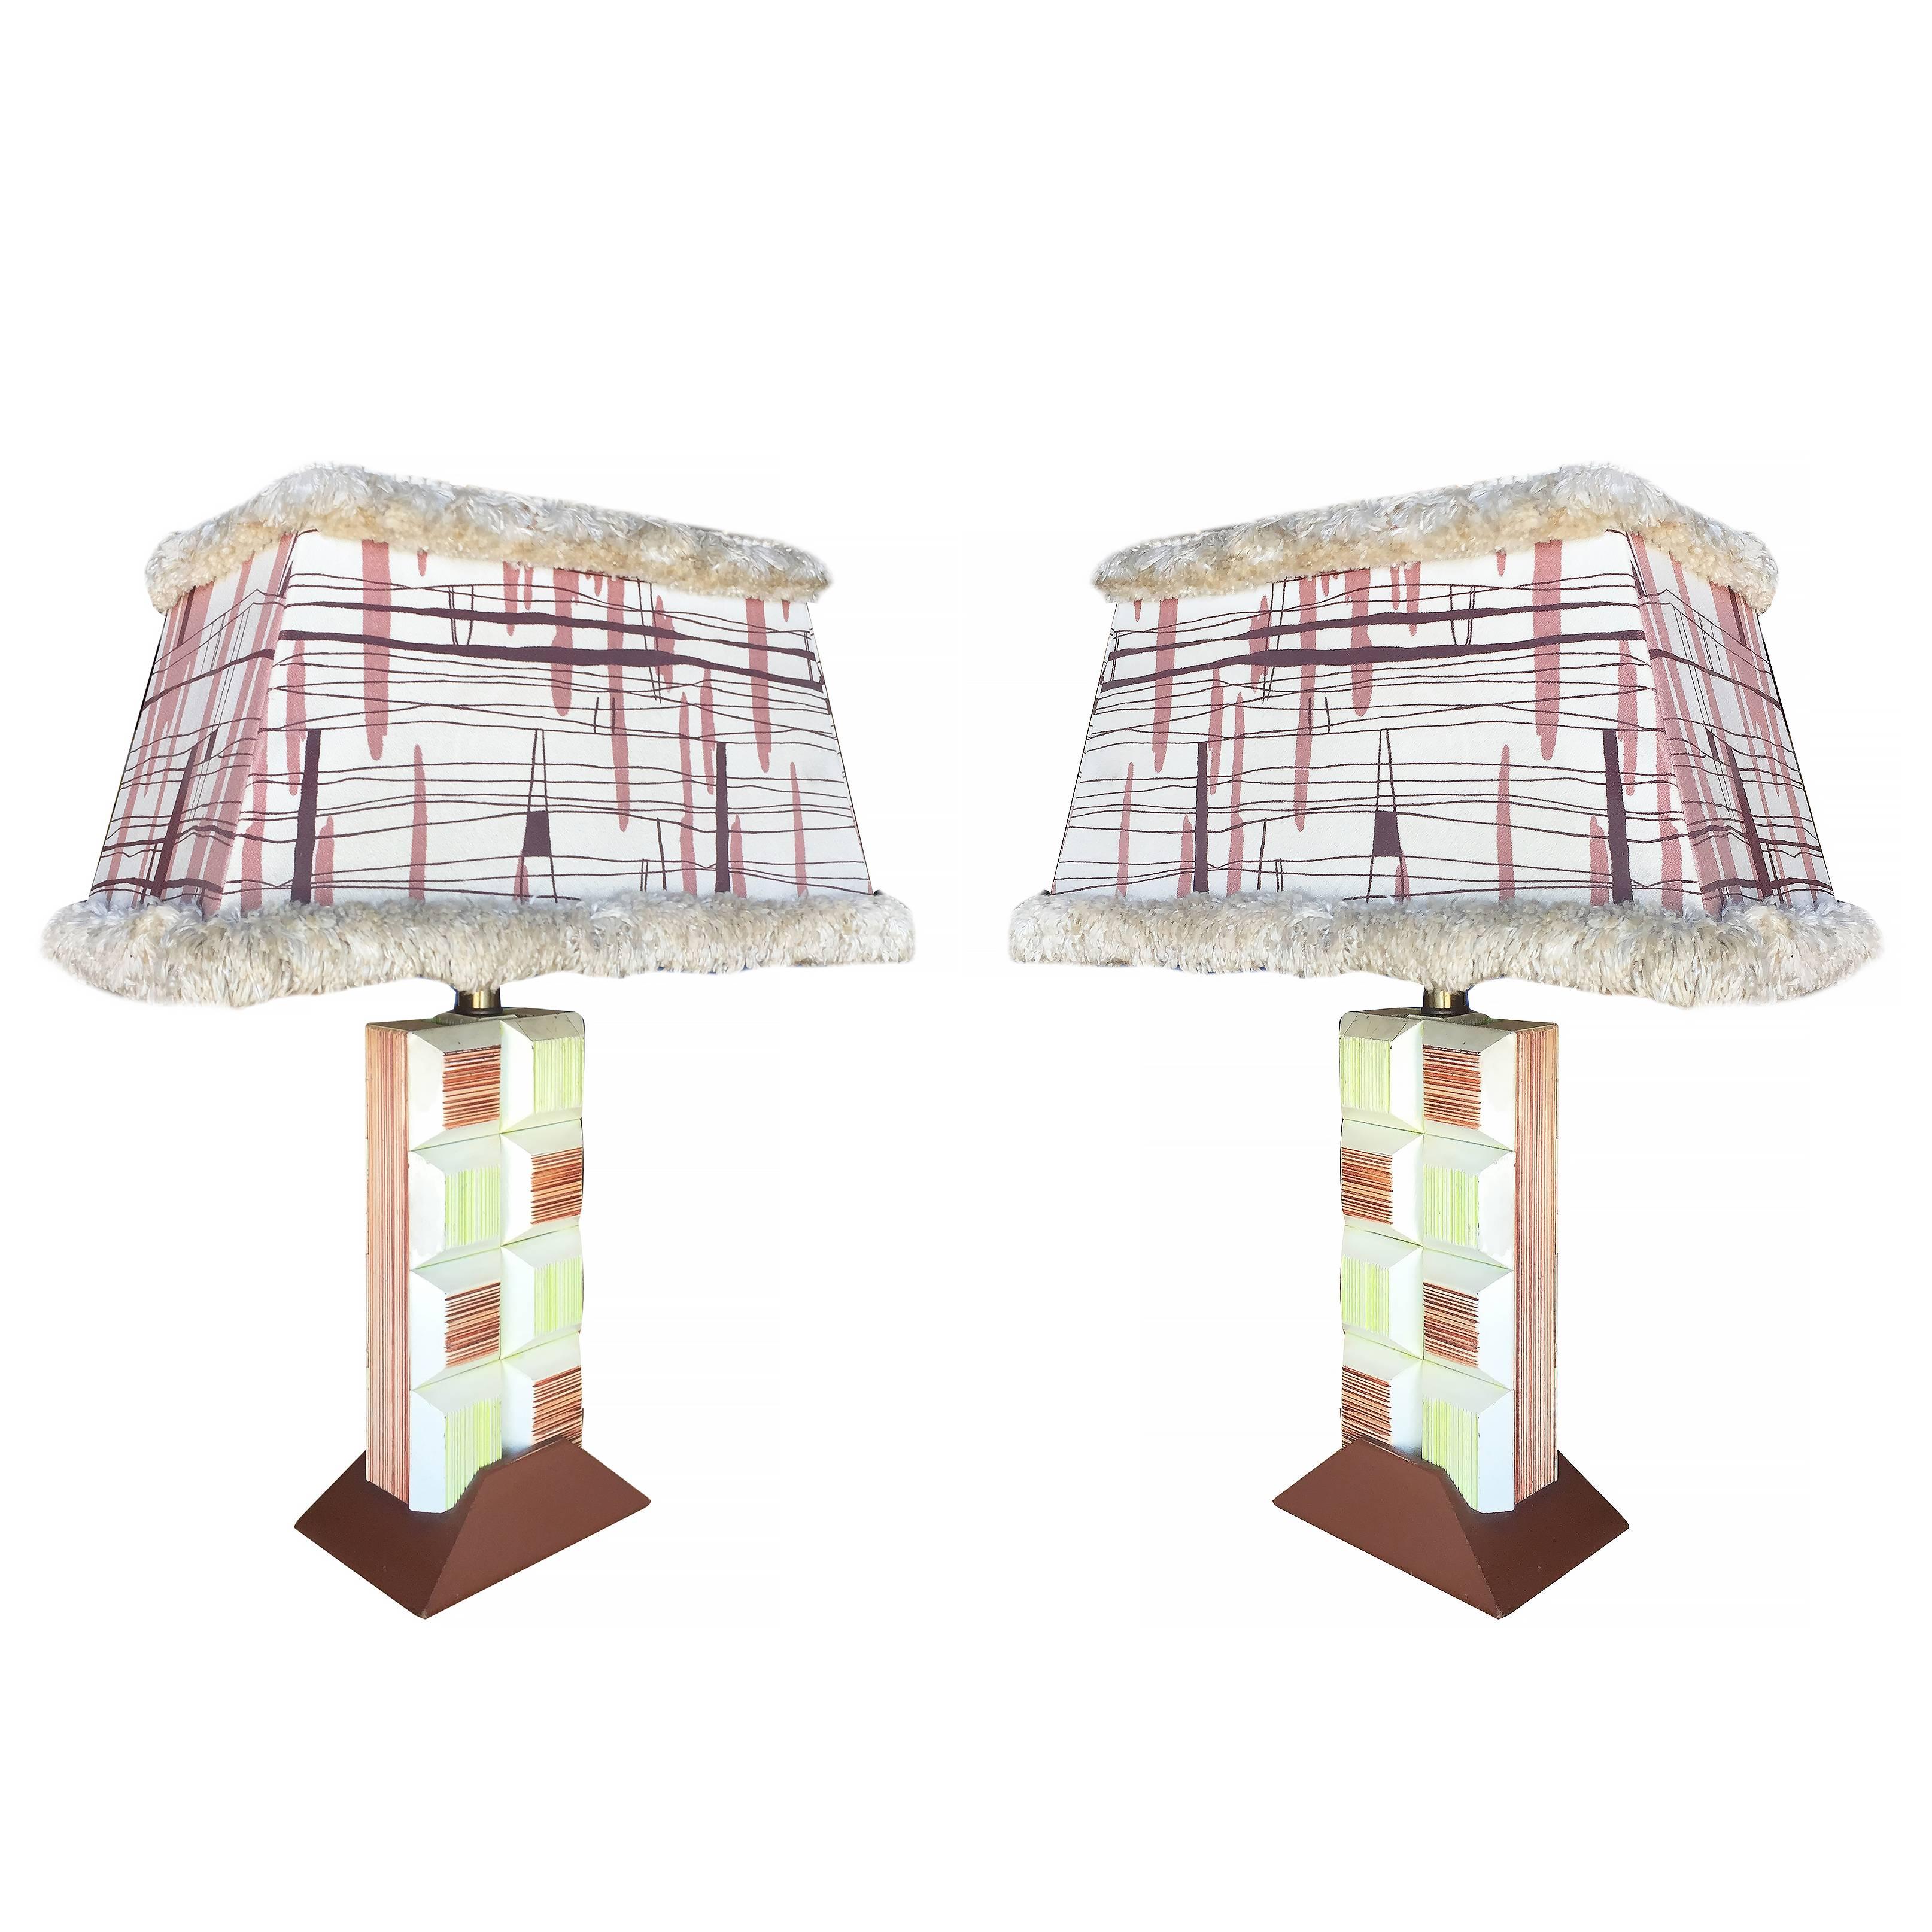 Midcentury Frankl Inspired Combed Cubist Block Table Lamp, Pair